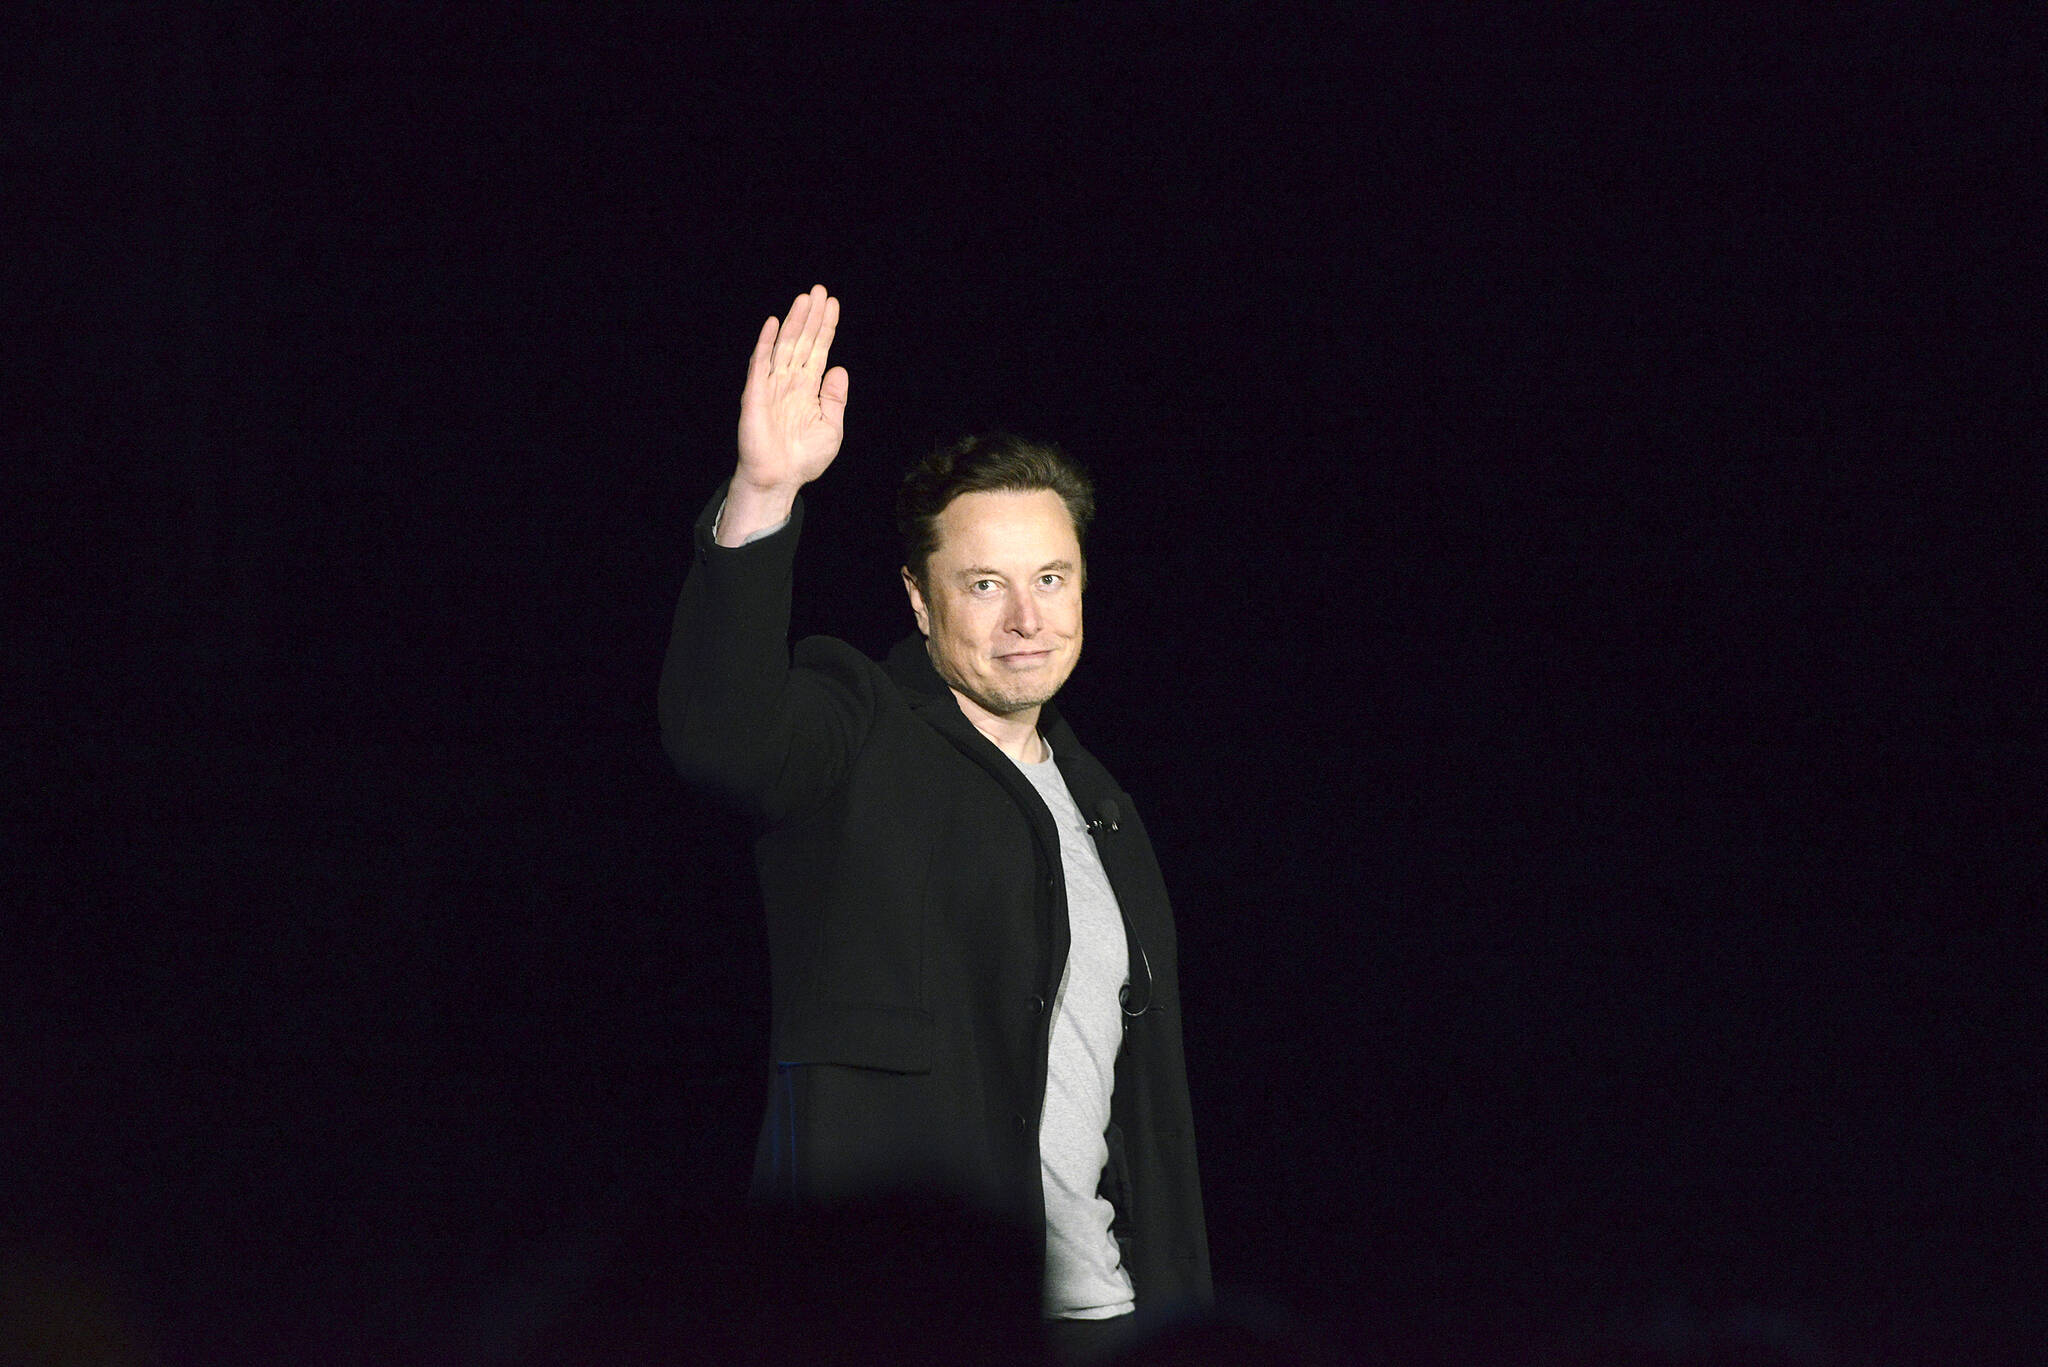 FILE - Elon Musk waves while providing an update on SpaceX’s Starship, Thursday, Feb. 10, 2022, near Brownsville, Texas. In April 2022, a group of Tesla shareholders suing Musk over some 2018 tweets about taking the company private is asking a federal judge to order him to stop commenting on the case. (Miguel Roberts/The Brownsville Herald via AP, File)